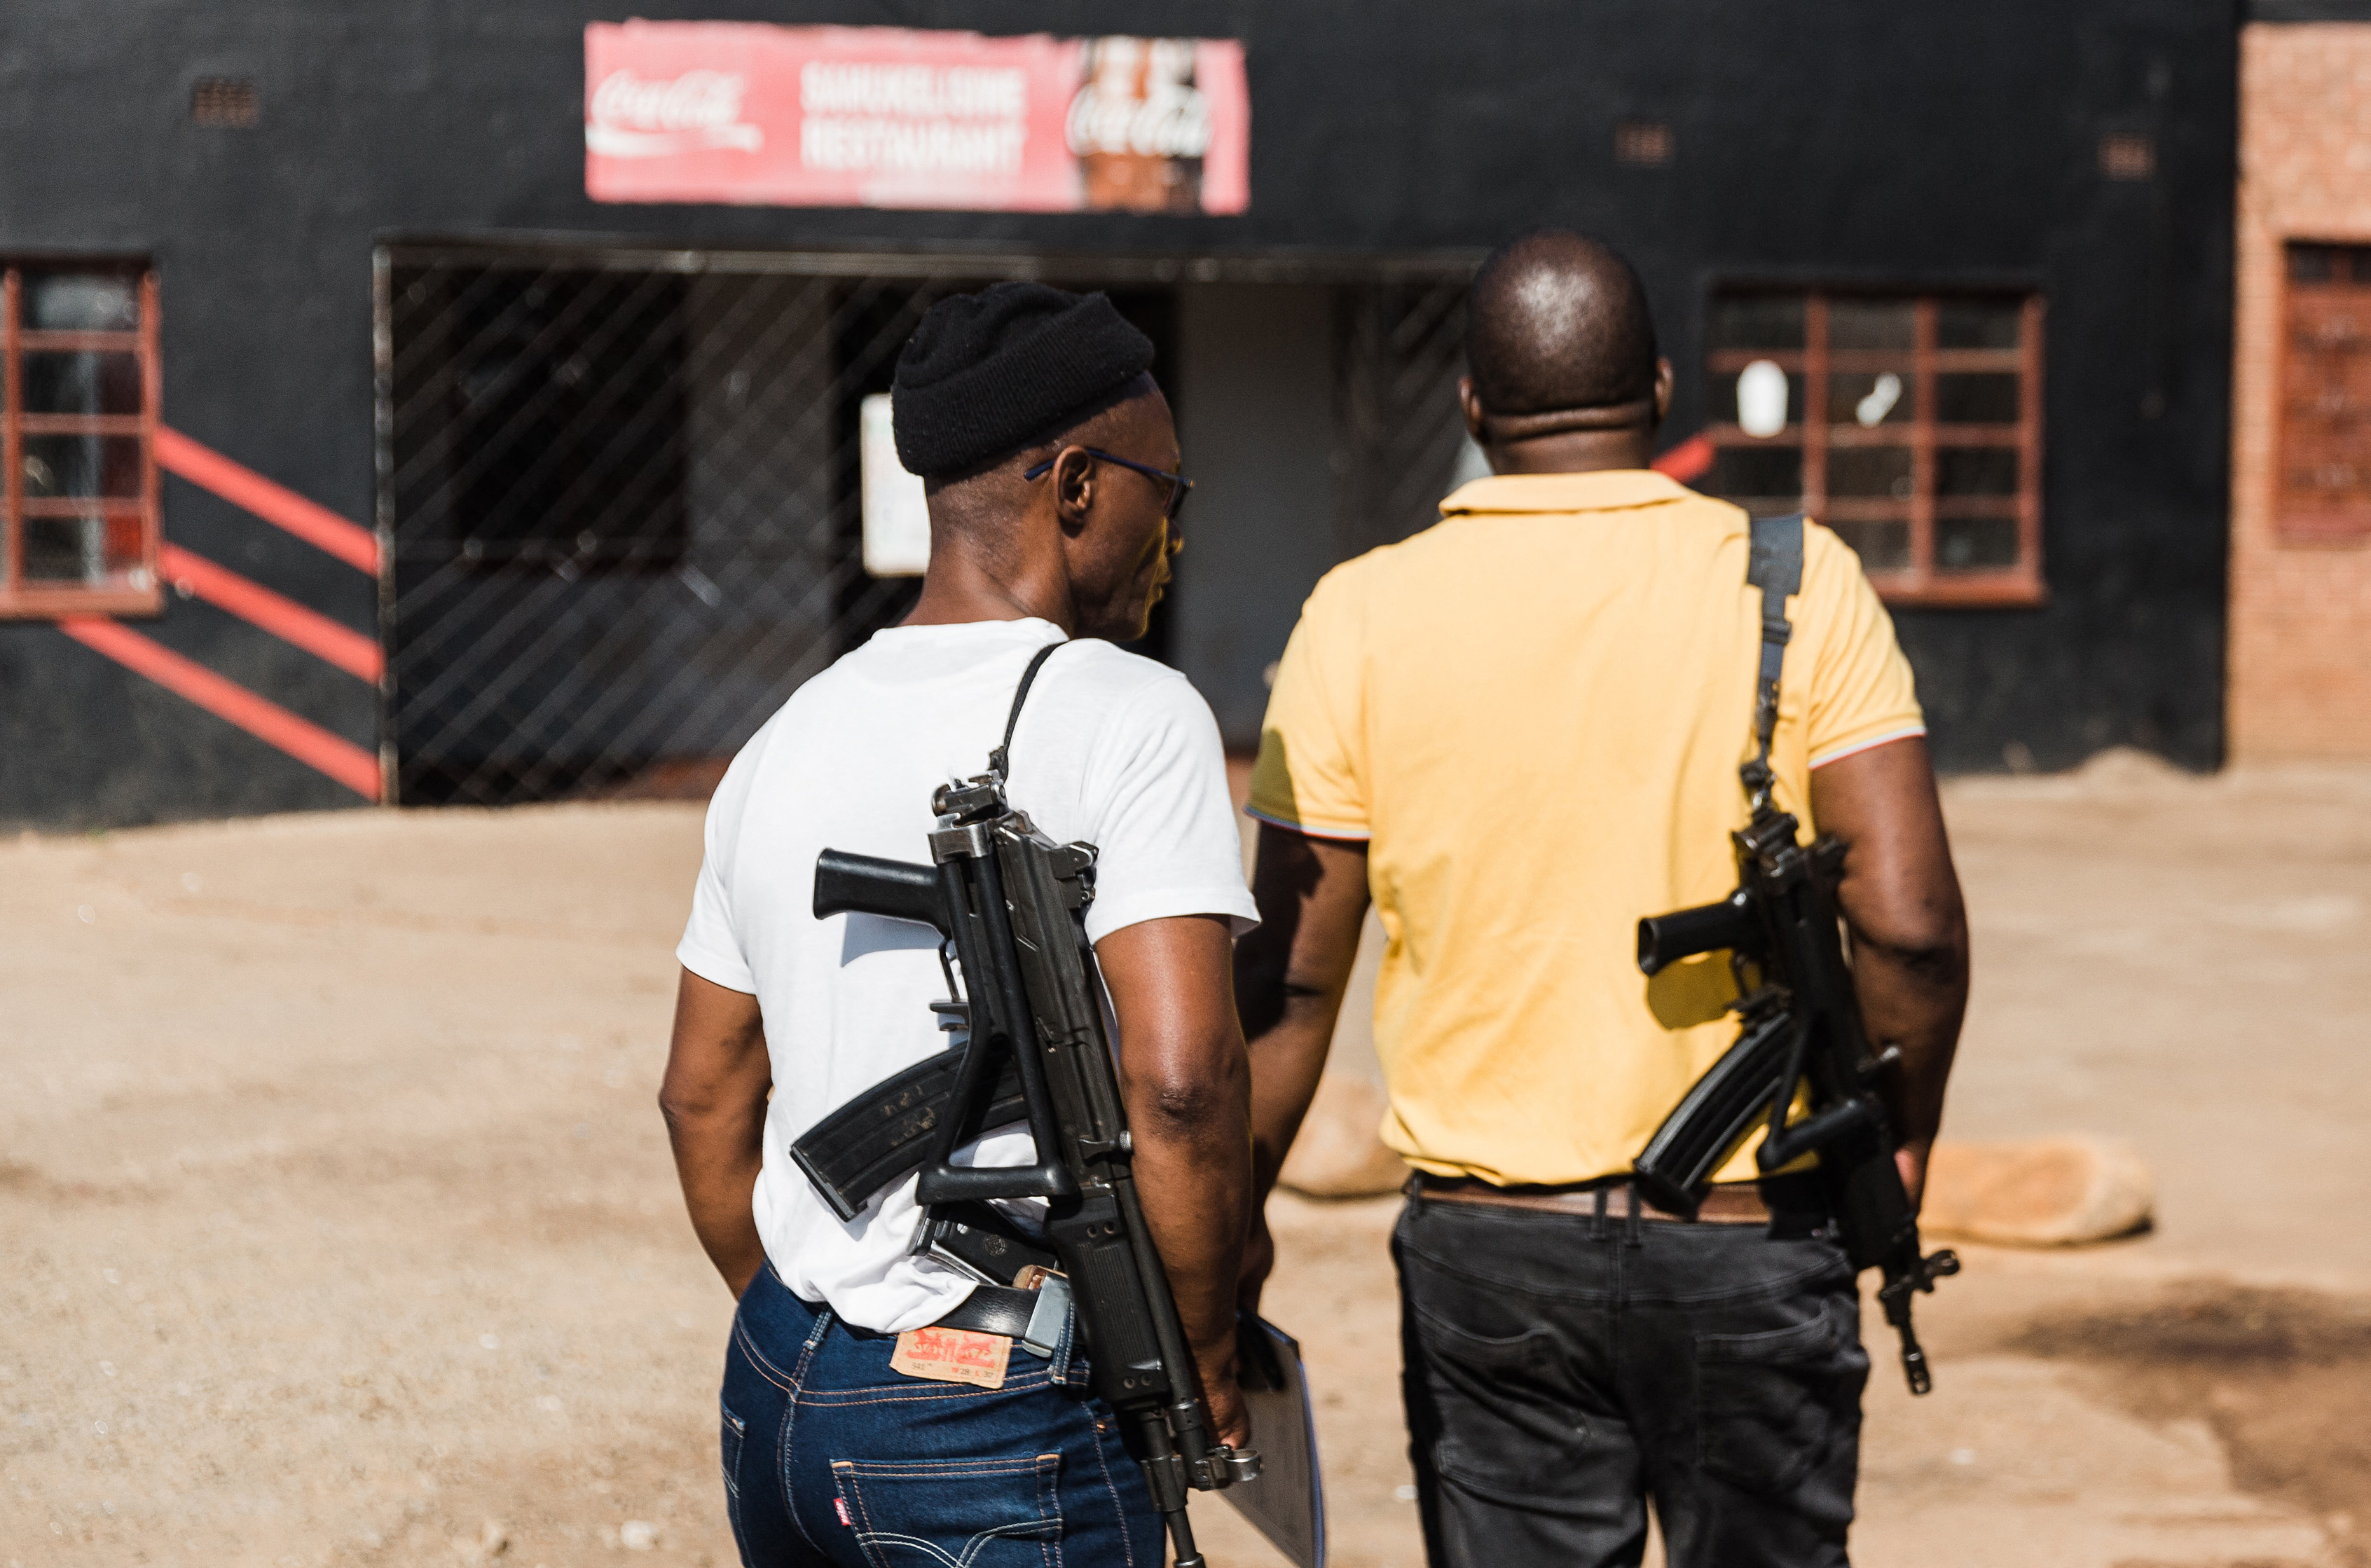 Security guards with automatic weapon in Pietermaritzburg, after a shooting in 2022